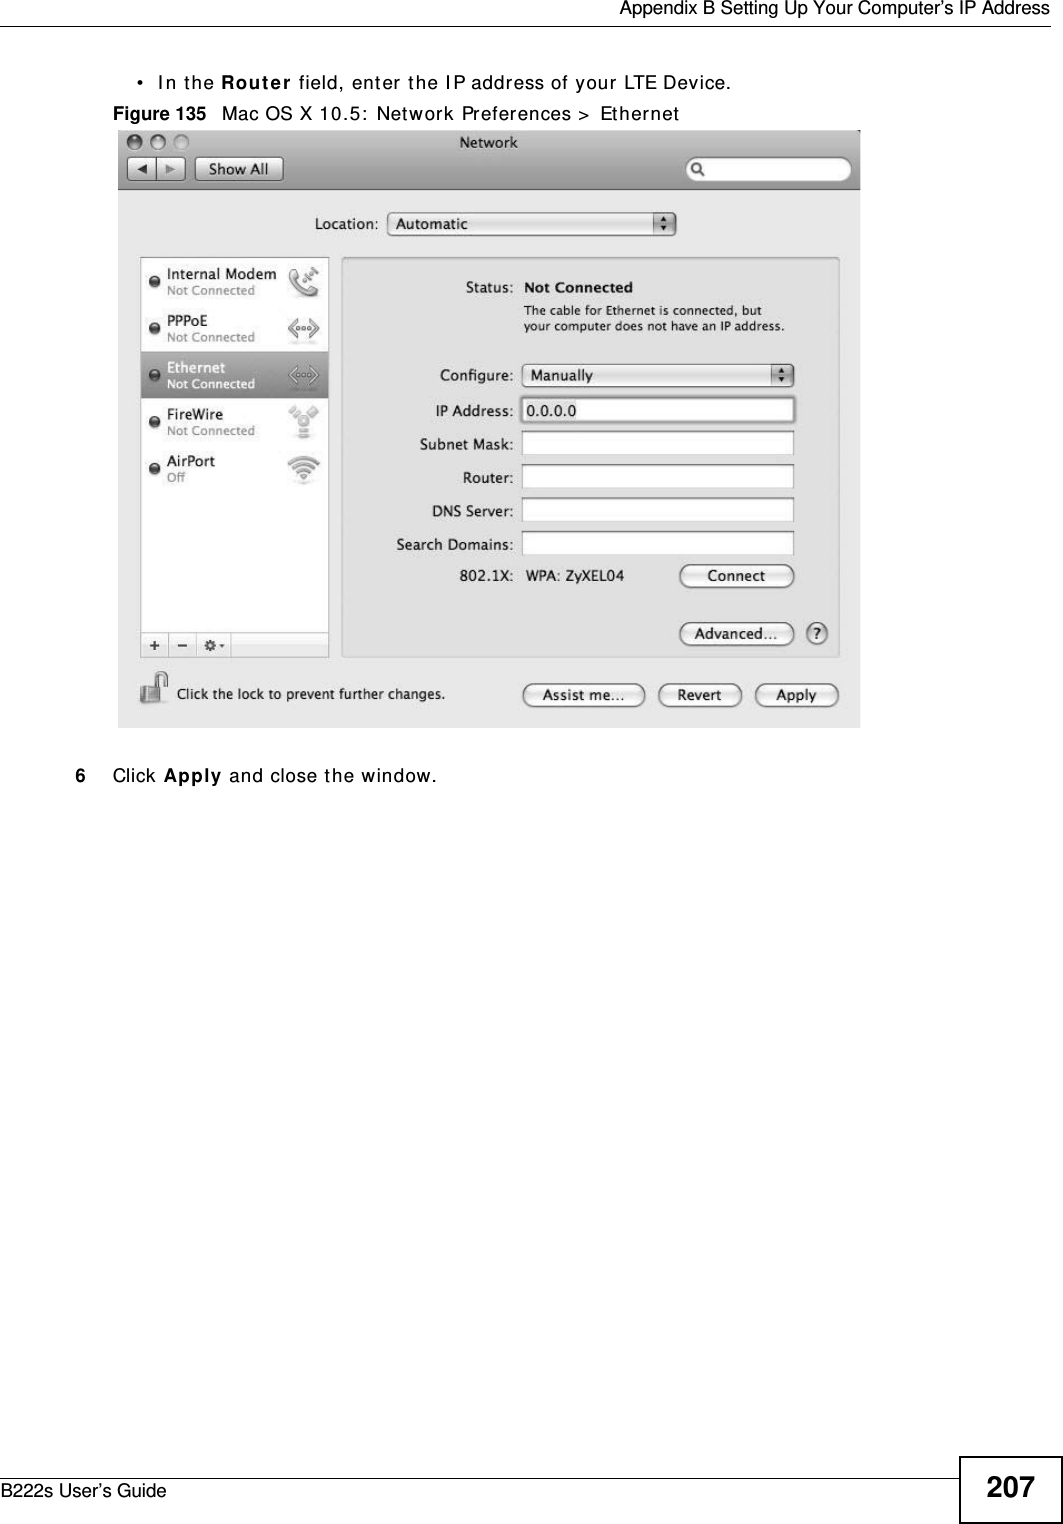  Appendix B Setting Up Your Computer’s IP AddressB222s User’s Guide 207• In the Rou t e r field, enter t he I P address of your LTE Device.Figure 135   Mac OS X 10.5:  Network Preferences &gt;  Et hernet6Click Apply and close t he window.